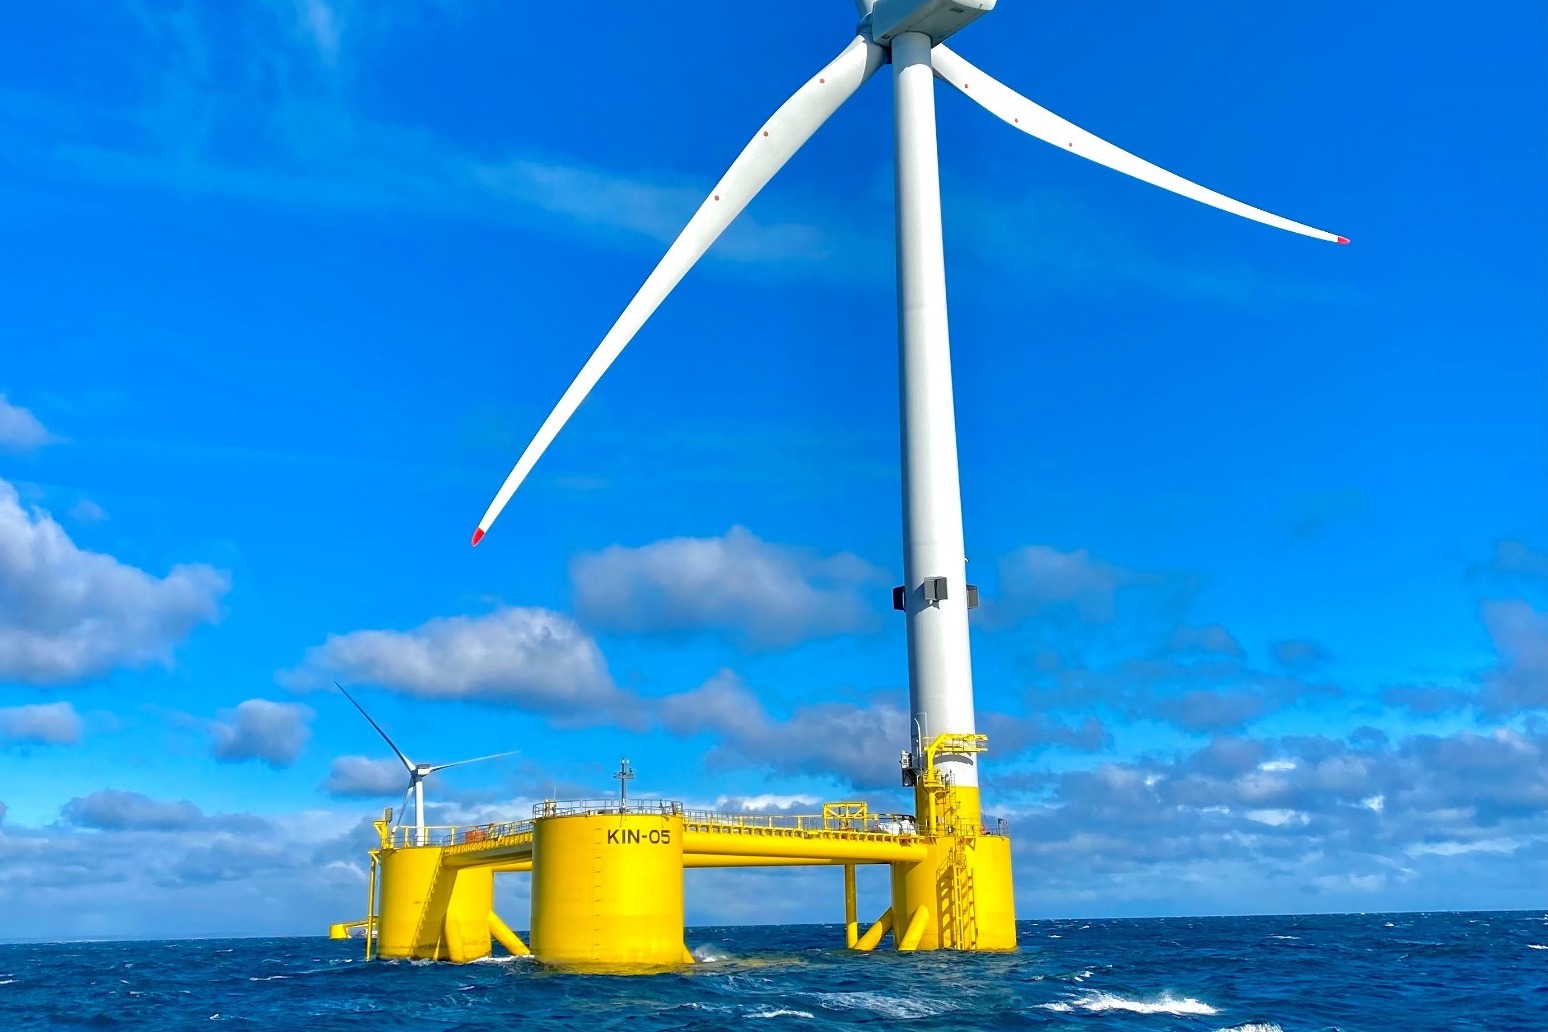 Floating offshore wind farm approved off Welsh coast 